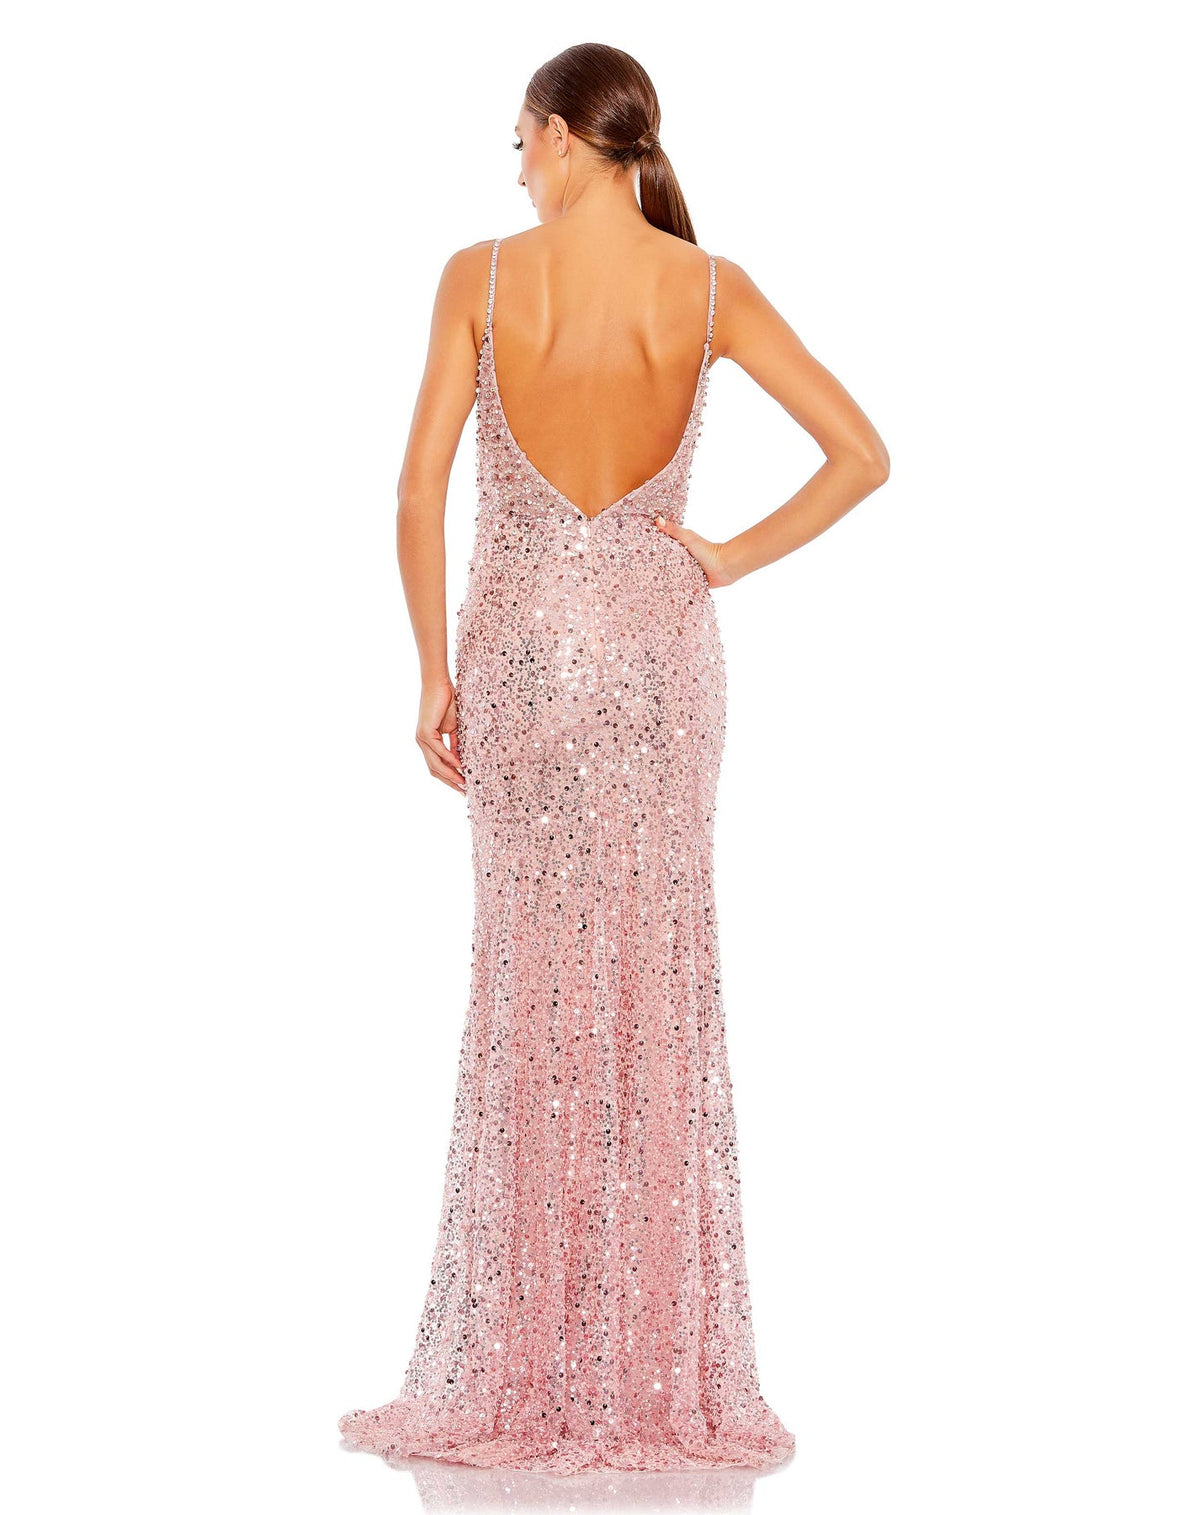 EMBELLISHED PLUNGE NECK SLEEVELESS TRUMPET GOWN mac duggal Style #68175 backless